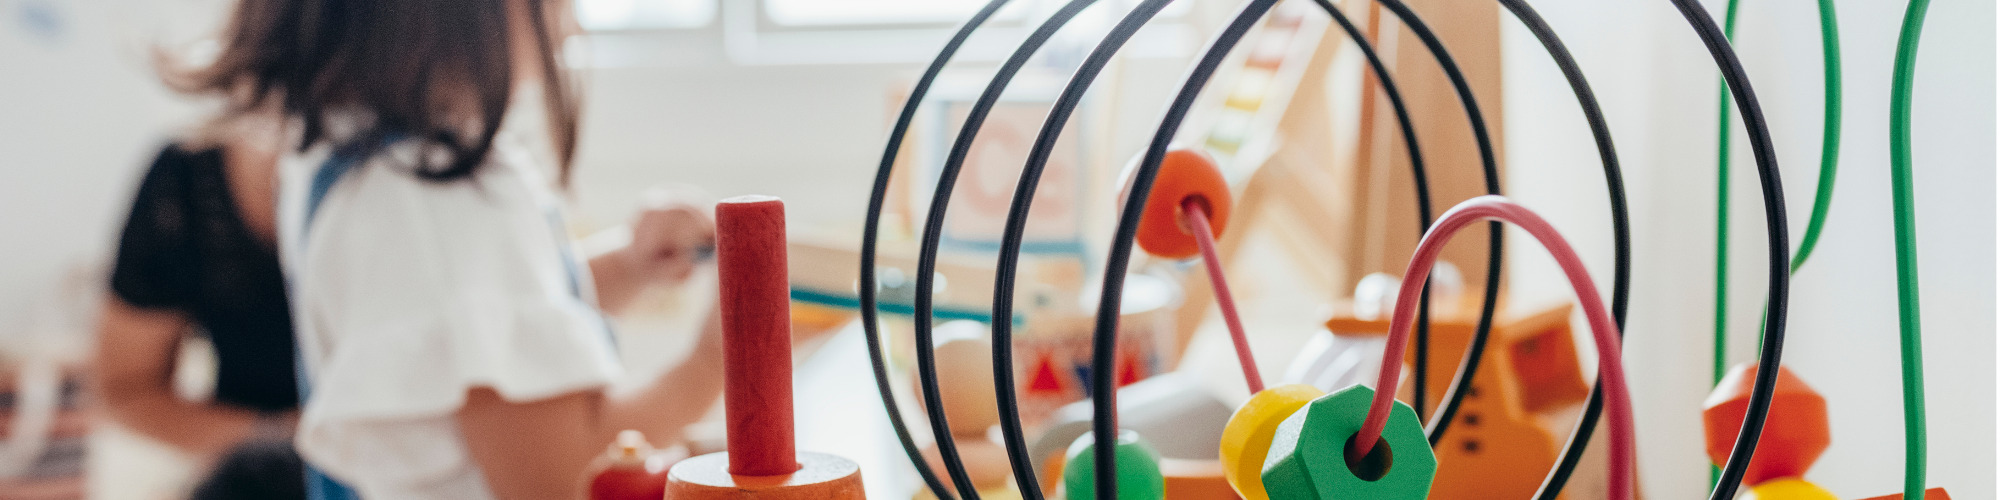 Practical Child Care Law & Practice - A Guide to Dealing with the Tricky Issues